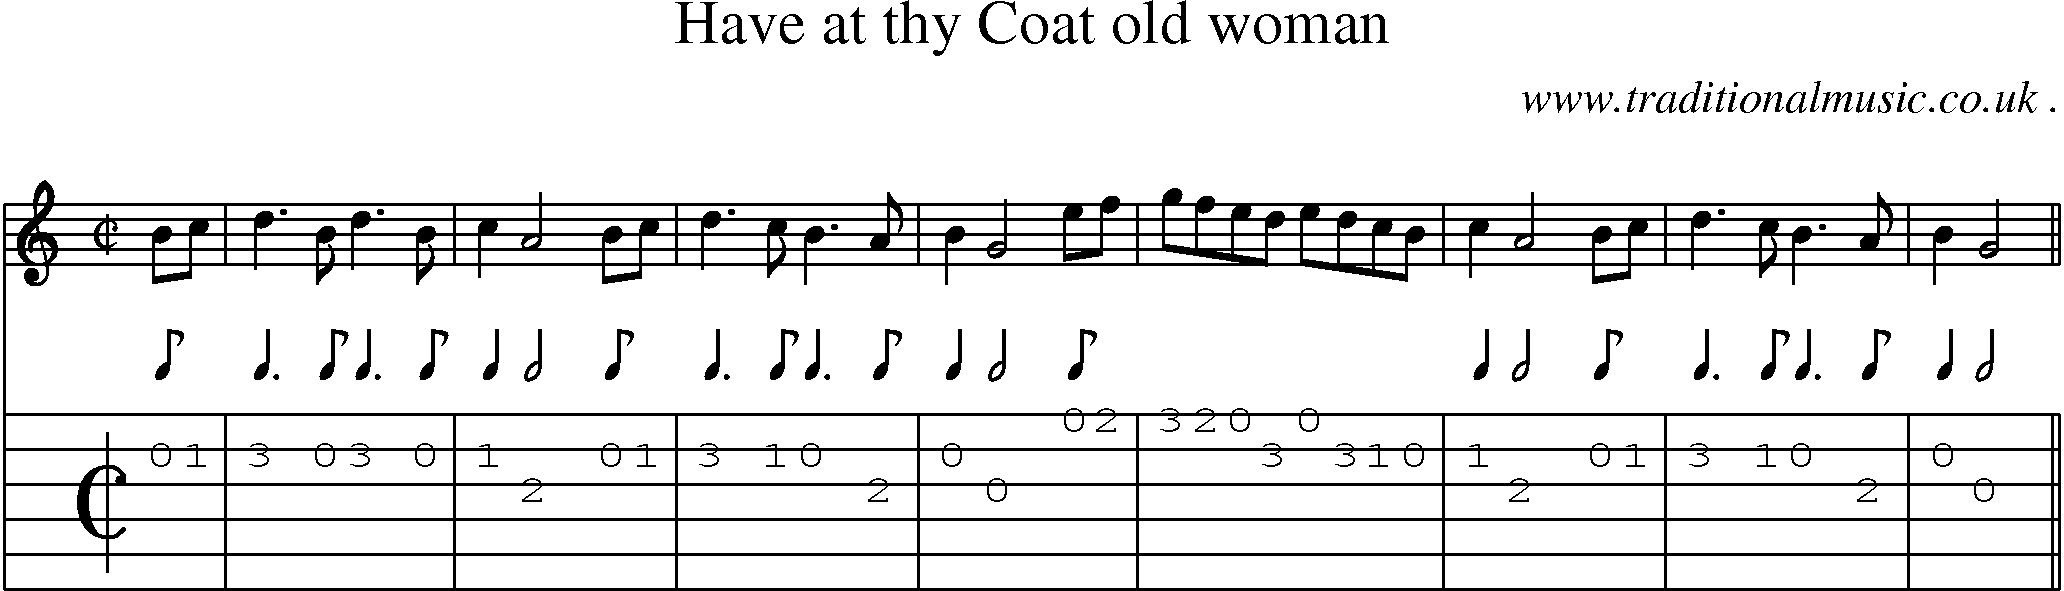 Sheet-Music and Guitar Tabs for Have At Thy Coat Old Woman